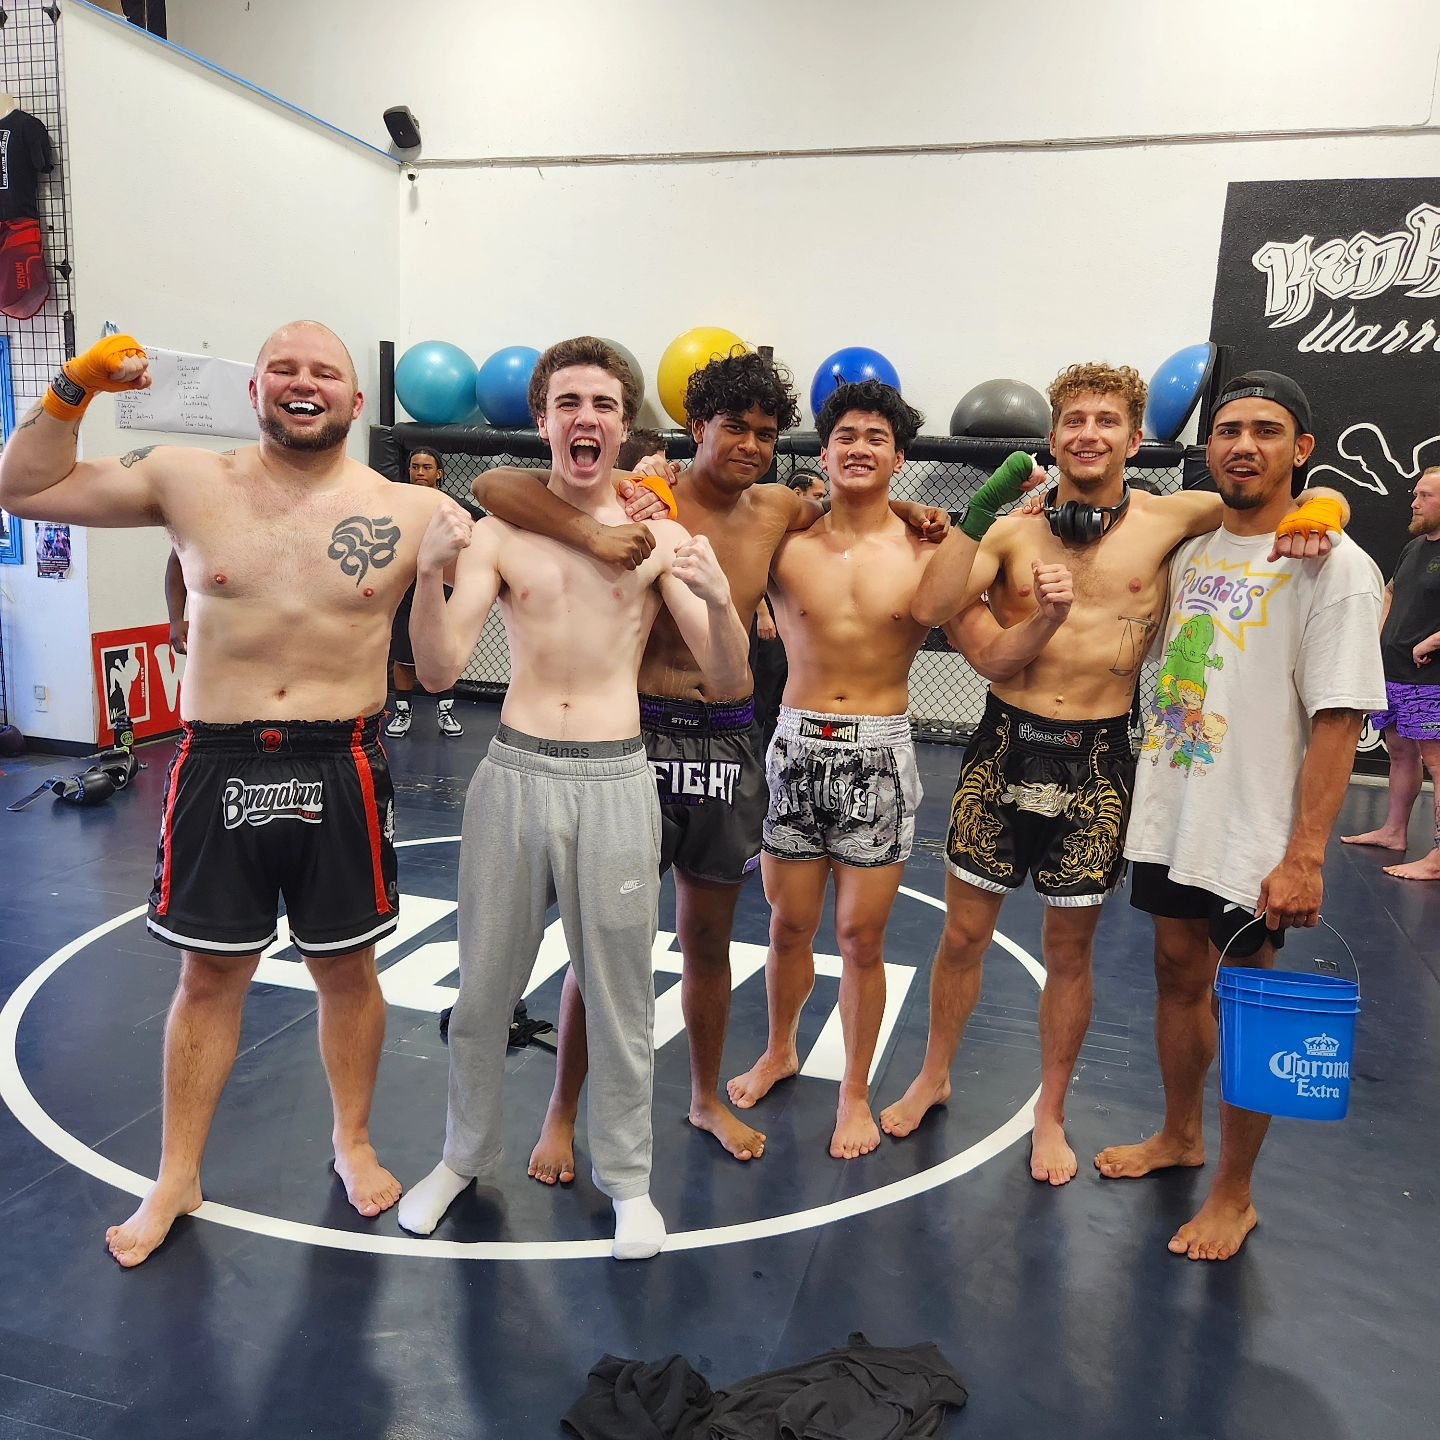 5-0 #805MMA came to DESTROY 👊🏻

Shout out to @berzerker_brycen @jacob_forsythe @saheljsingh @jm_abaya05 @cameronmetcalf45 and @jekyll_baez for coaching everyone to victory, esso 

#winnerscircle